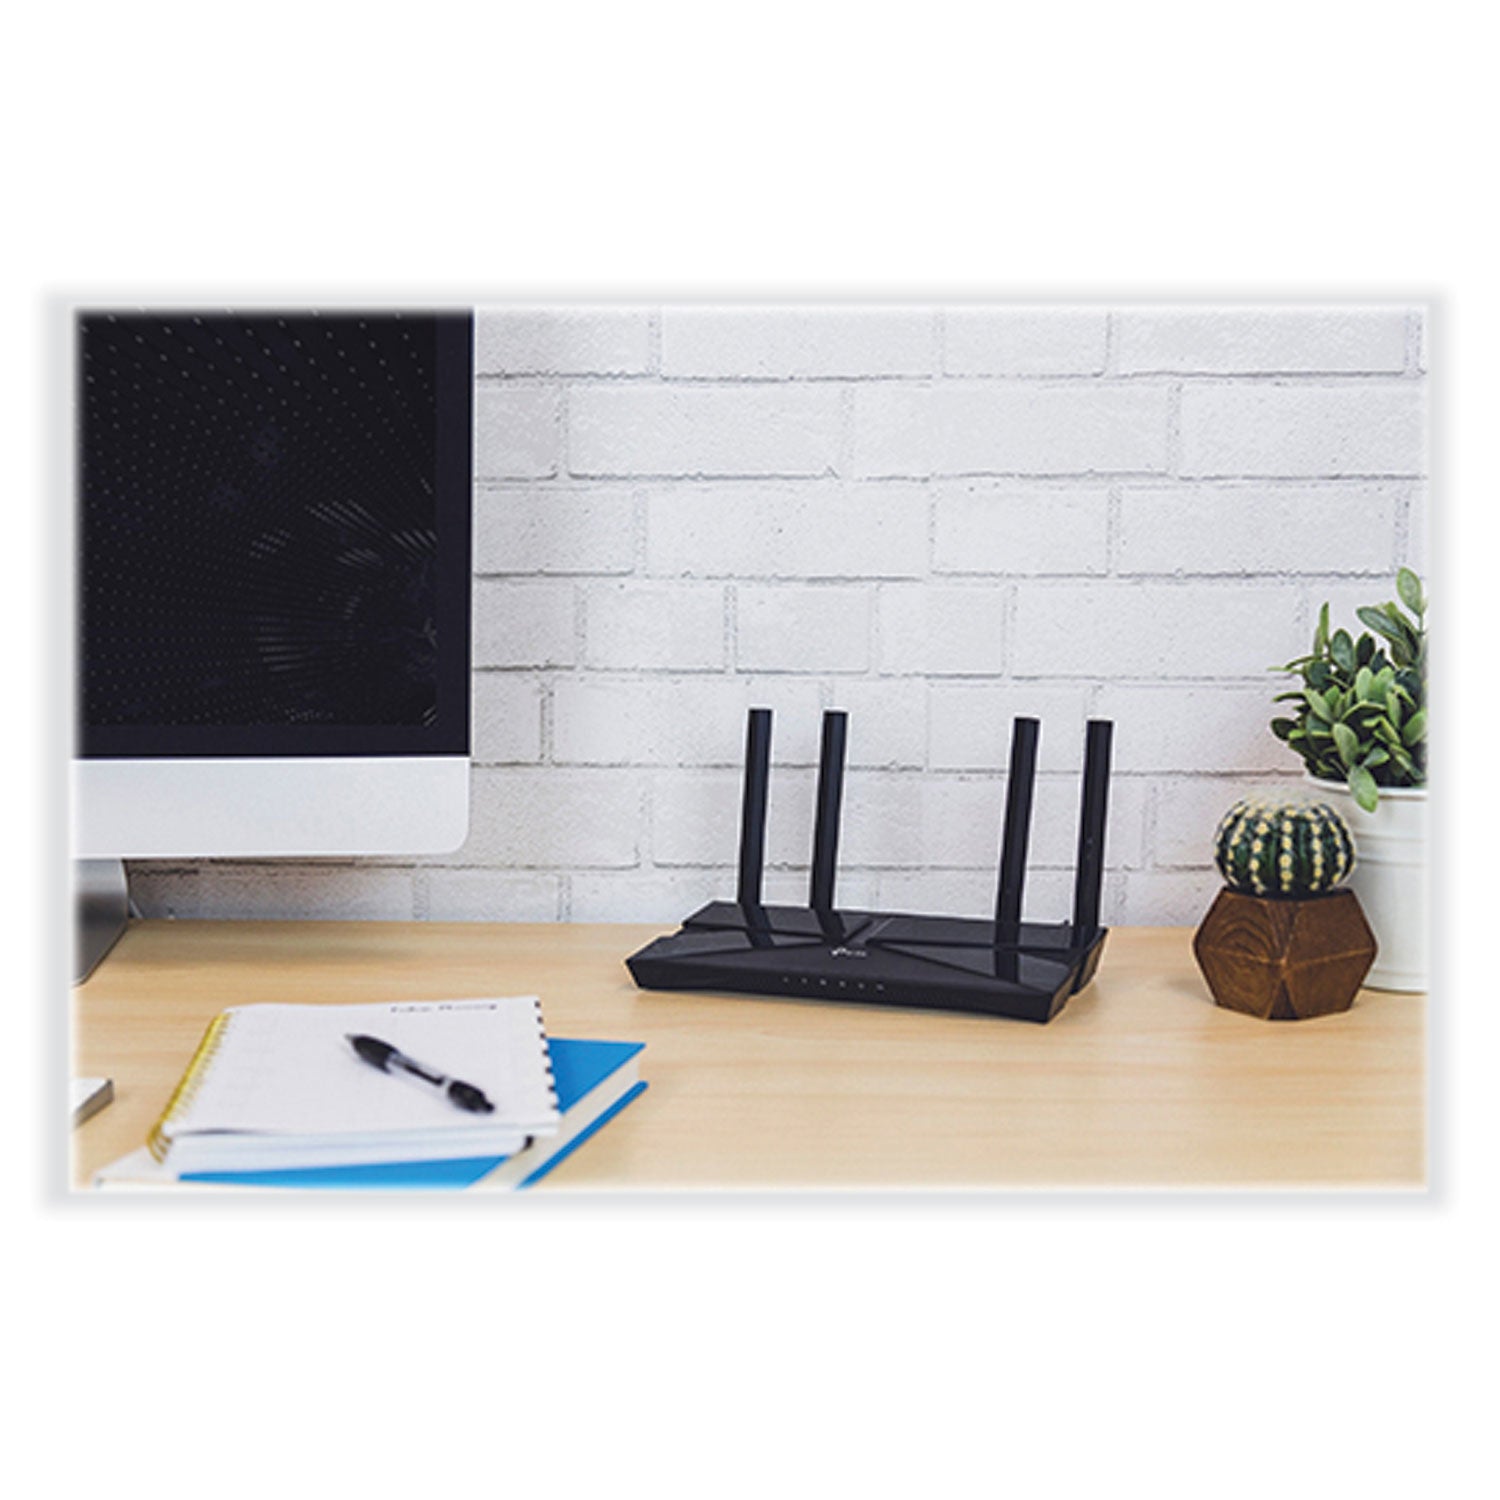 archer-ax1500-wireless-and-ethernet-router-5-ports-dual-band-24-ghz-5-ghz_tplarcherax1500 - 5